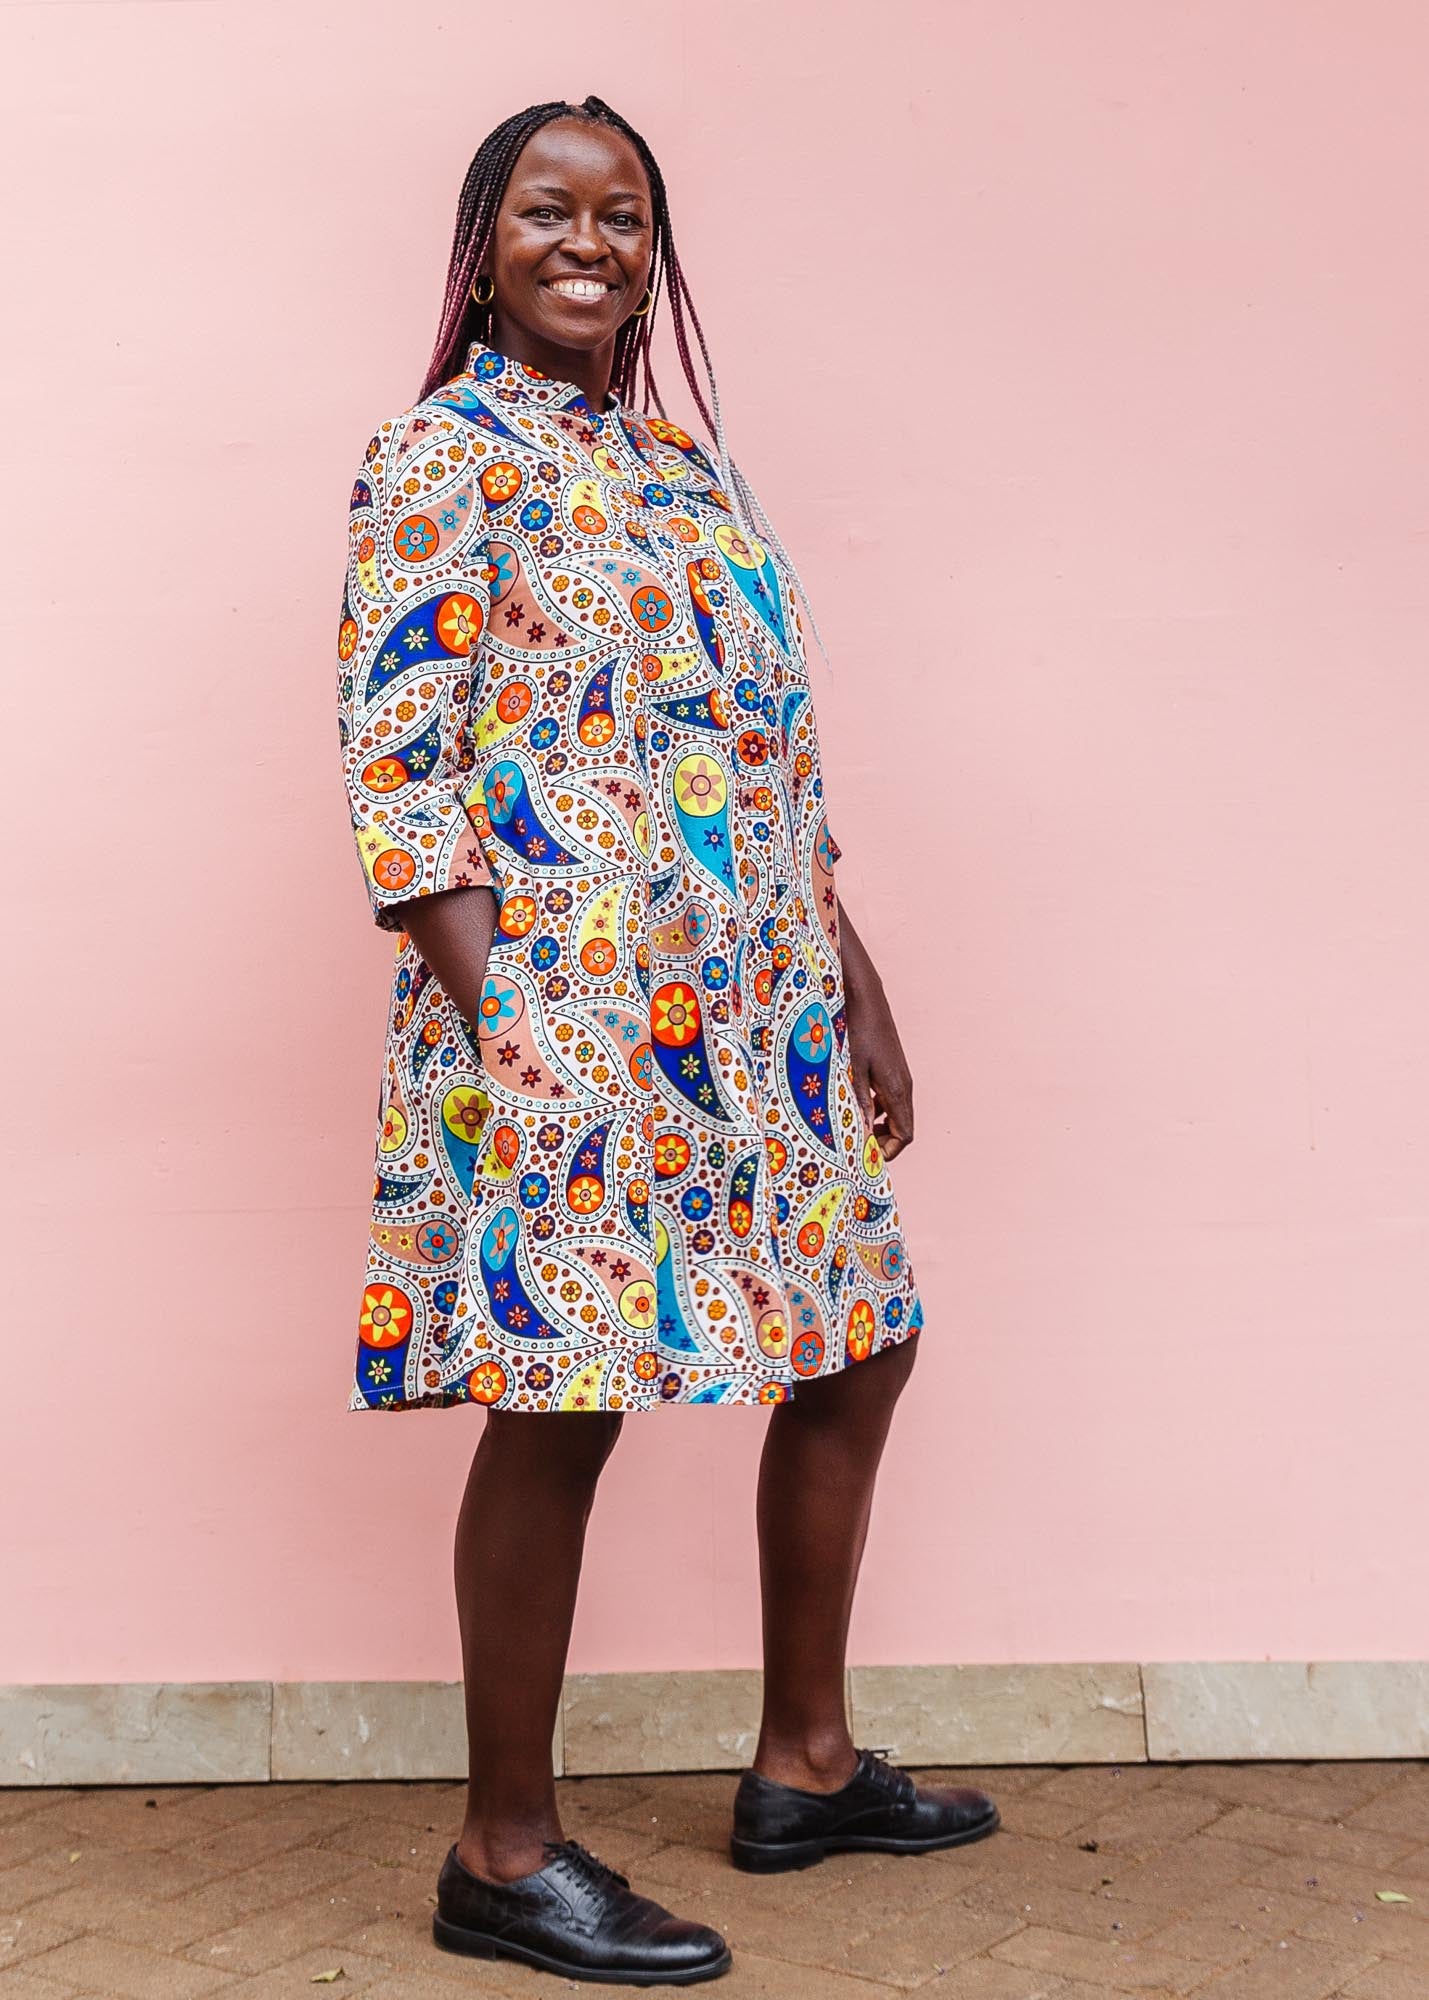 The model is wearing multi-colored paisley print dress